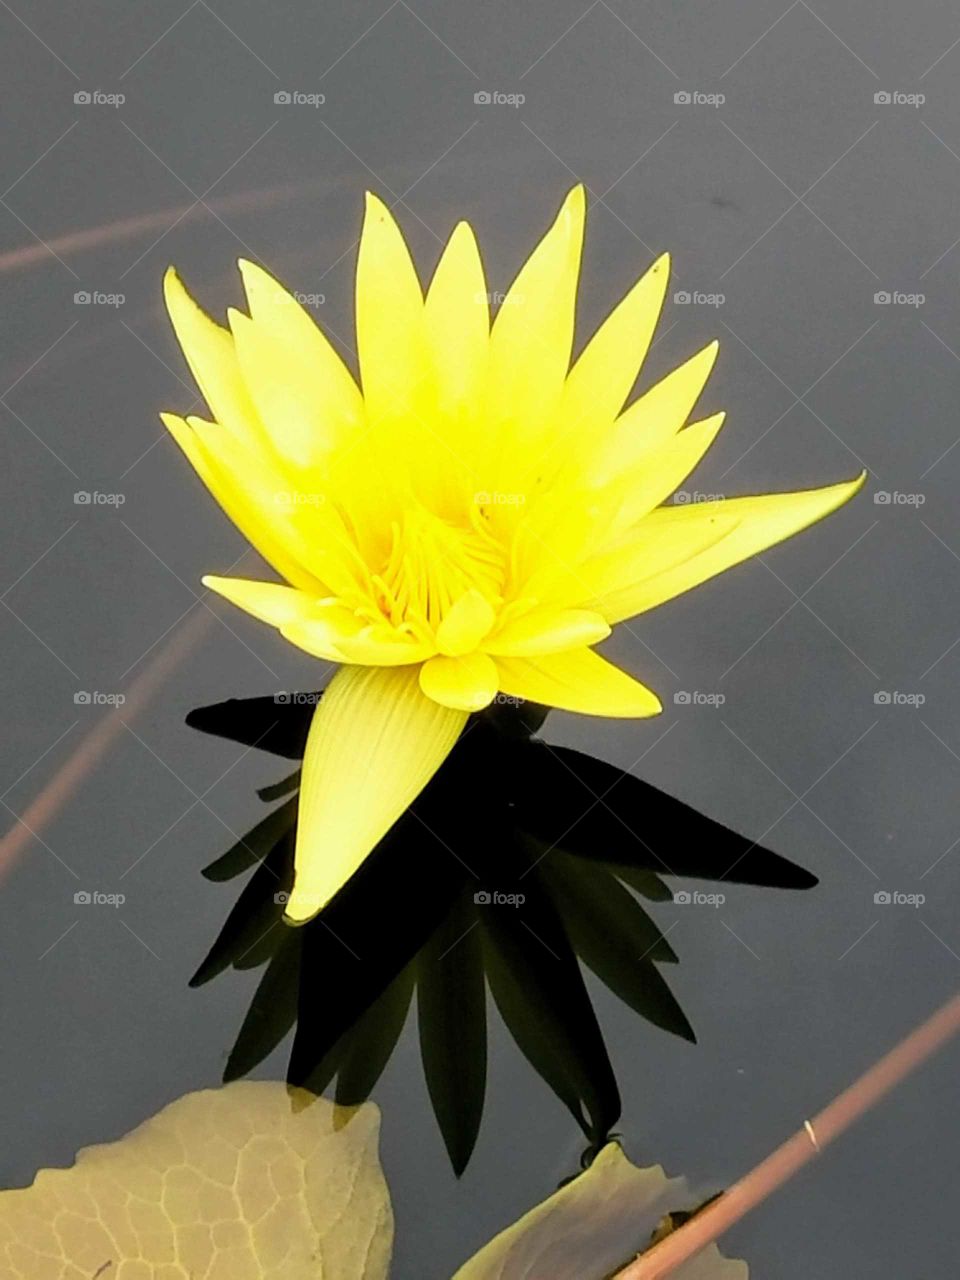 yellow water lily close-up with reflection